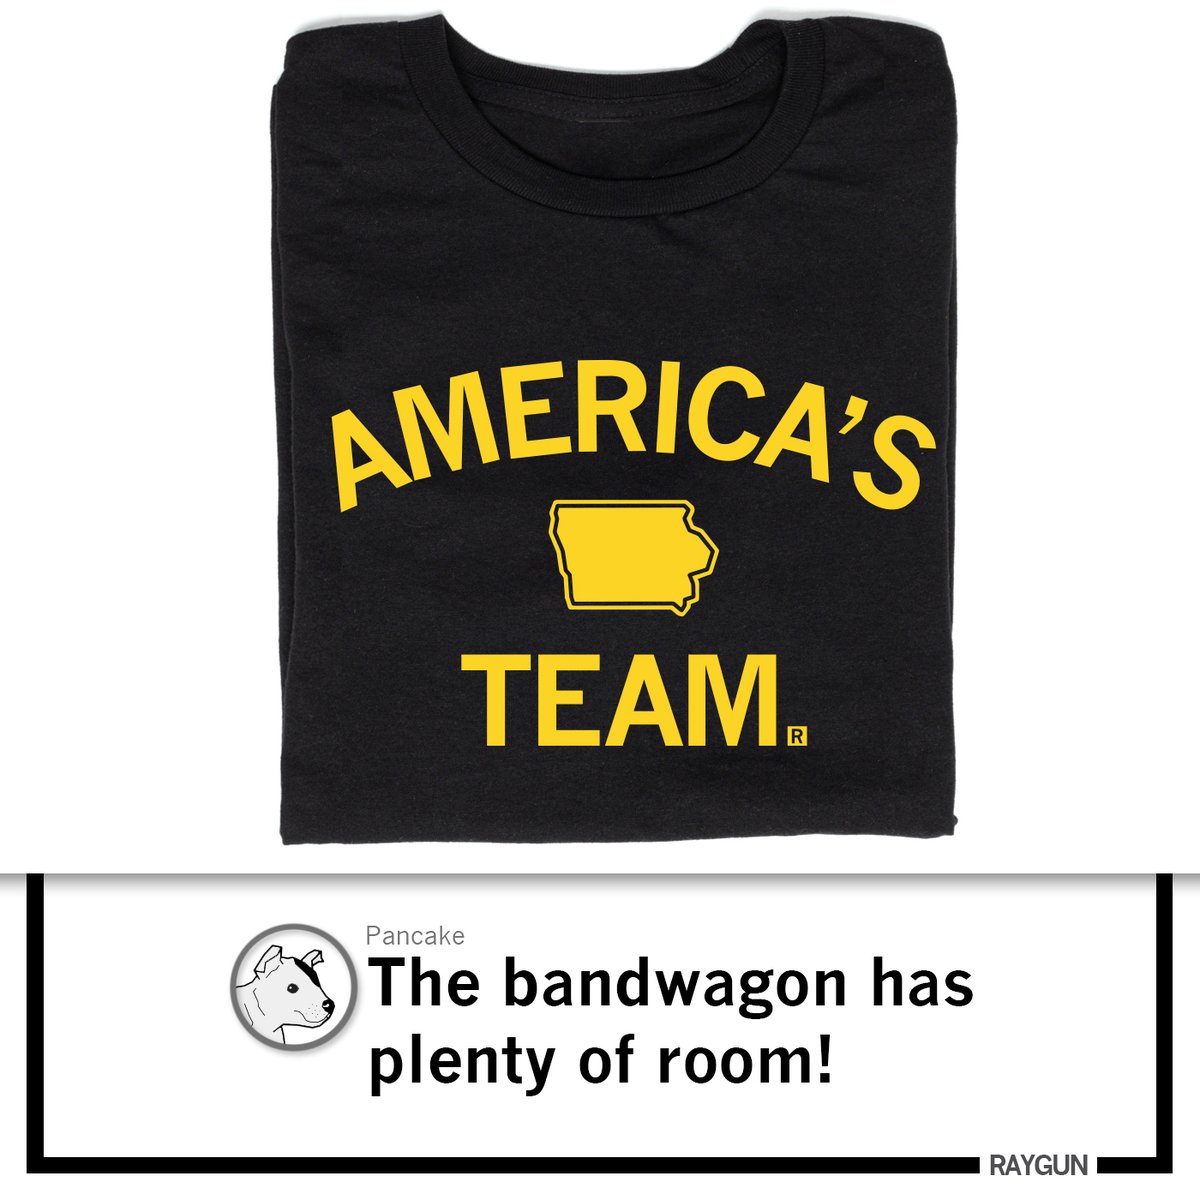 Okay Hawkeye fans: NO ONE CHANGE YOUR UNDERWEAR THIS WEEKEND. We need to be in this together. Rest of America: welcome aboard the bandwagon. #raygun raygunsite.com